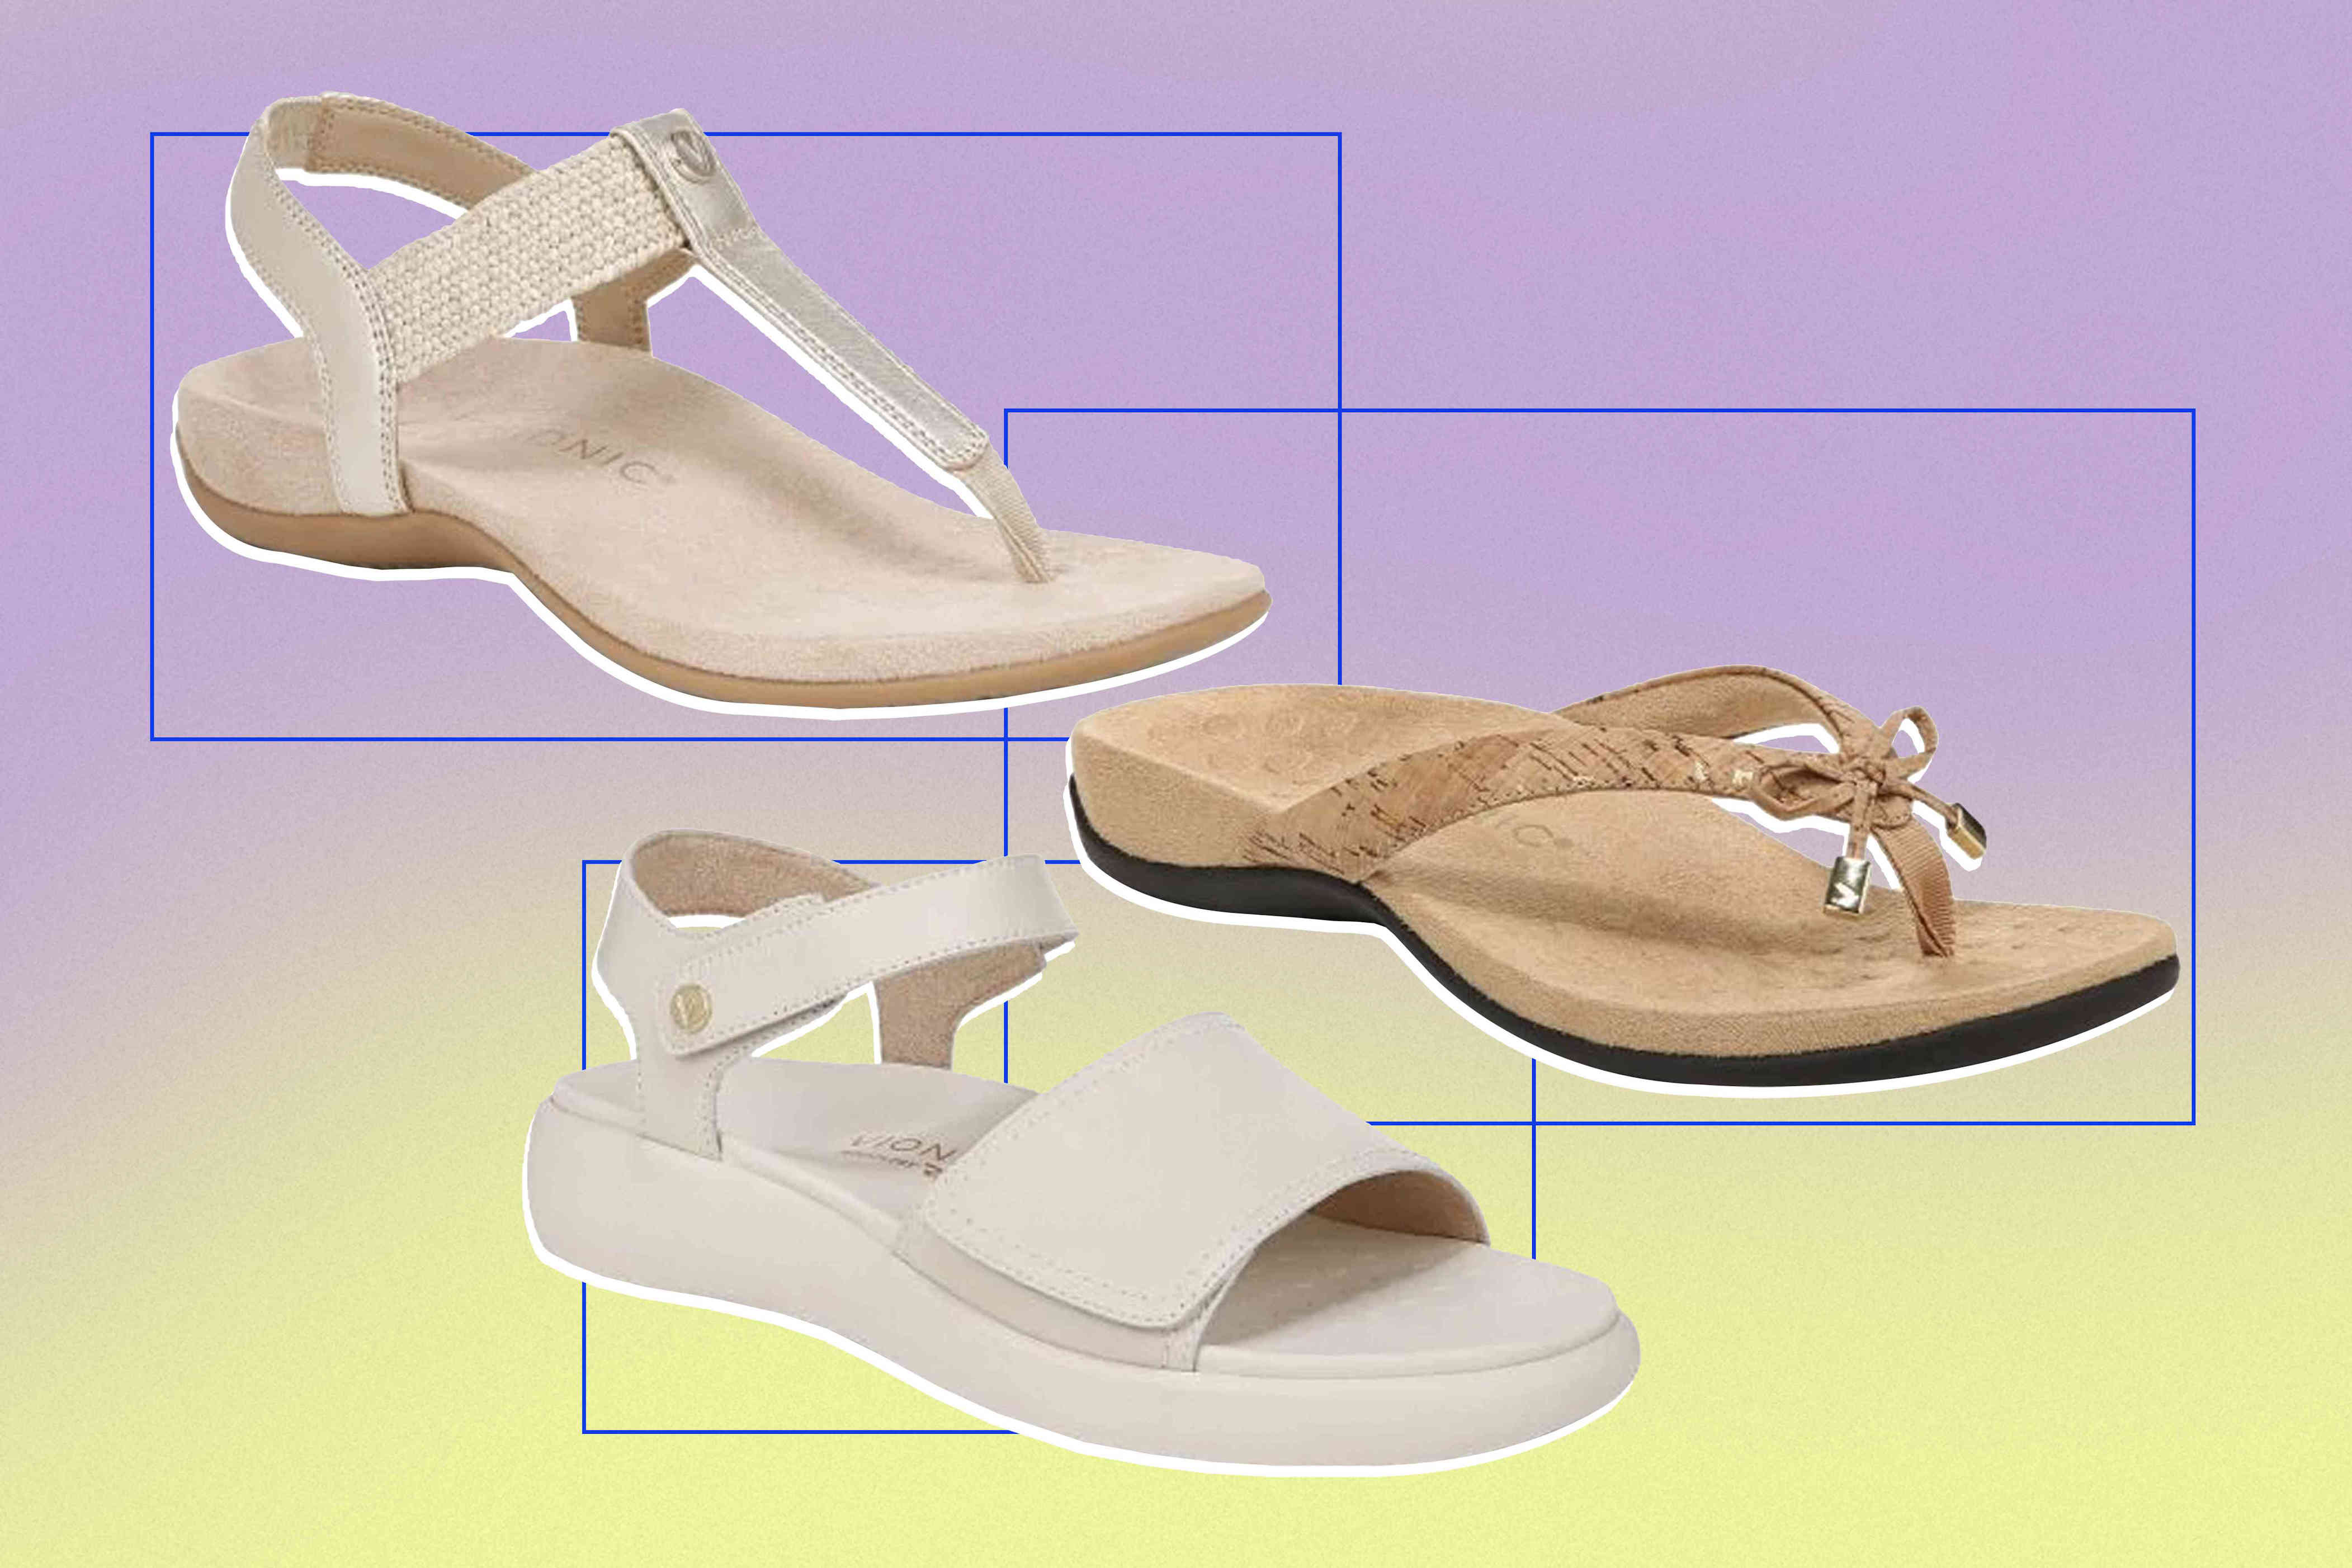 shoppers can 'walk without pain' in these comfy sandals from an oprah-worn brand